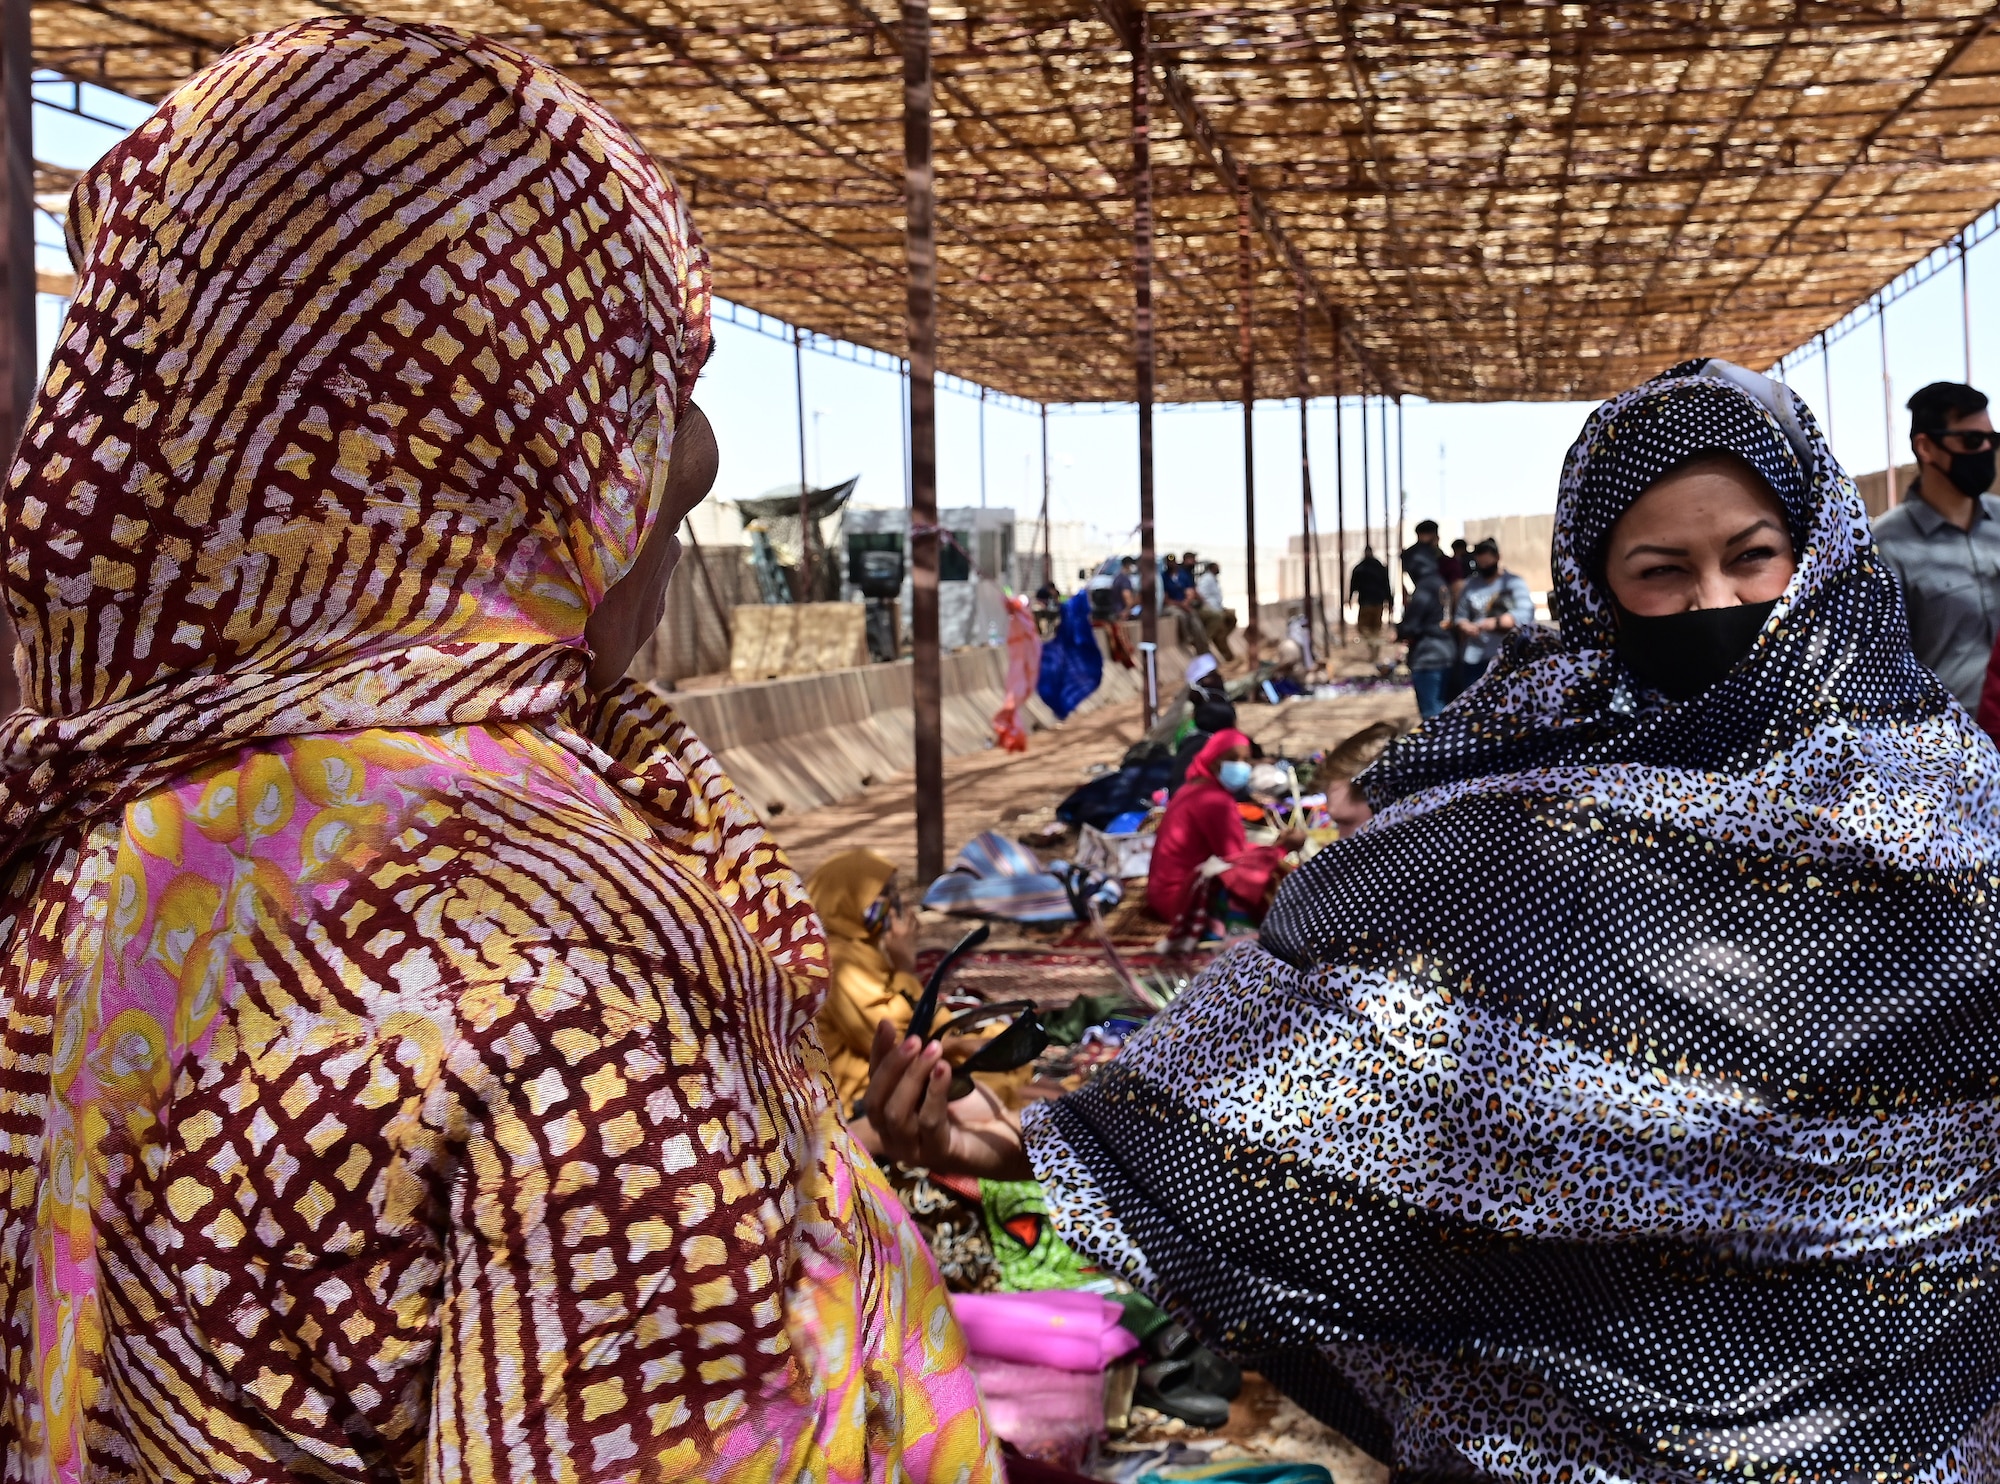 U.S. Air Force Maj. Maribel Seegmiller (right), 724th Expeditionary Air Base Squadron director of operations, tries on a traditional African dress during a bazaar at Nigerien Air Base 201, Agadez, Niger, Feb. 27, 2022.  Over 40 local vendors from the city of Agadez and surrounding villages attended the bazaar, selling various goods. U.S. service members purchased approximately 10,532,000 West African CFA francs ($18K USD) worth of merchandise. Events like these enhance U.S., Niger relationships and stimulate local economic development. (U.S. Air Force photo by Tech. Sgt. Stephanie Longoria)